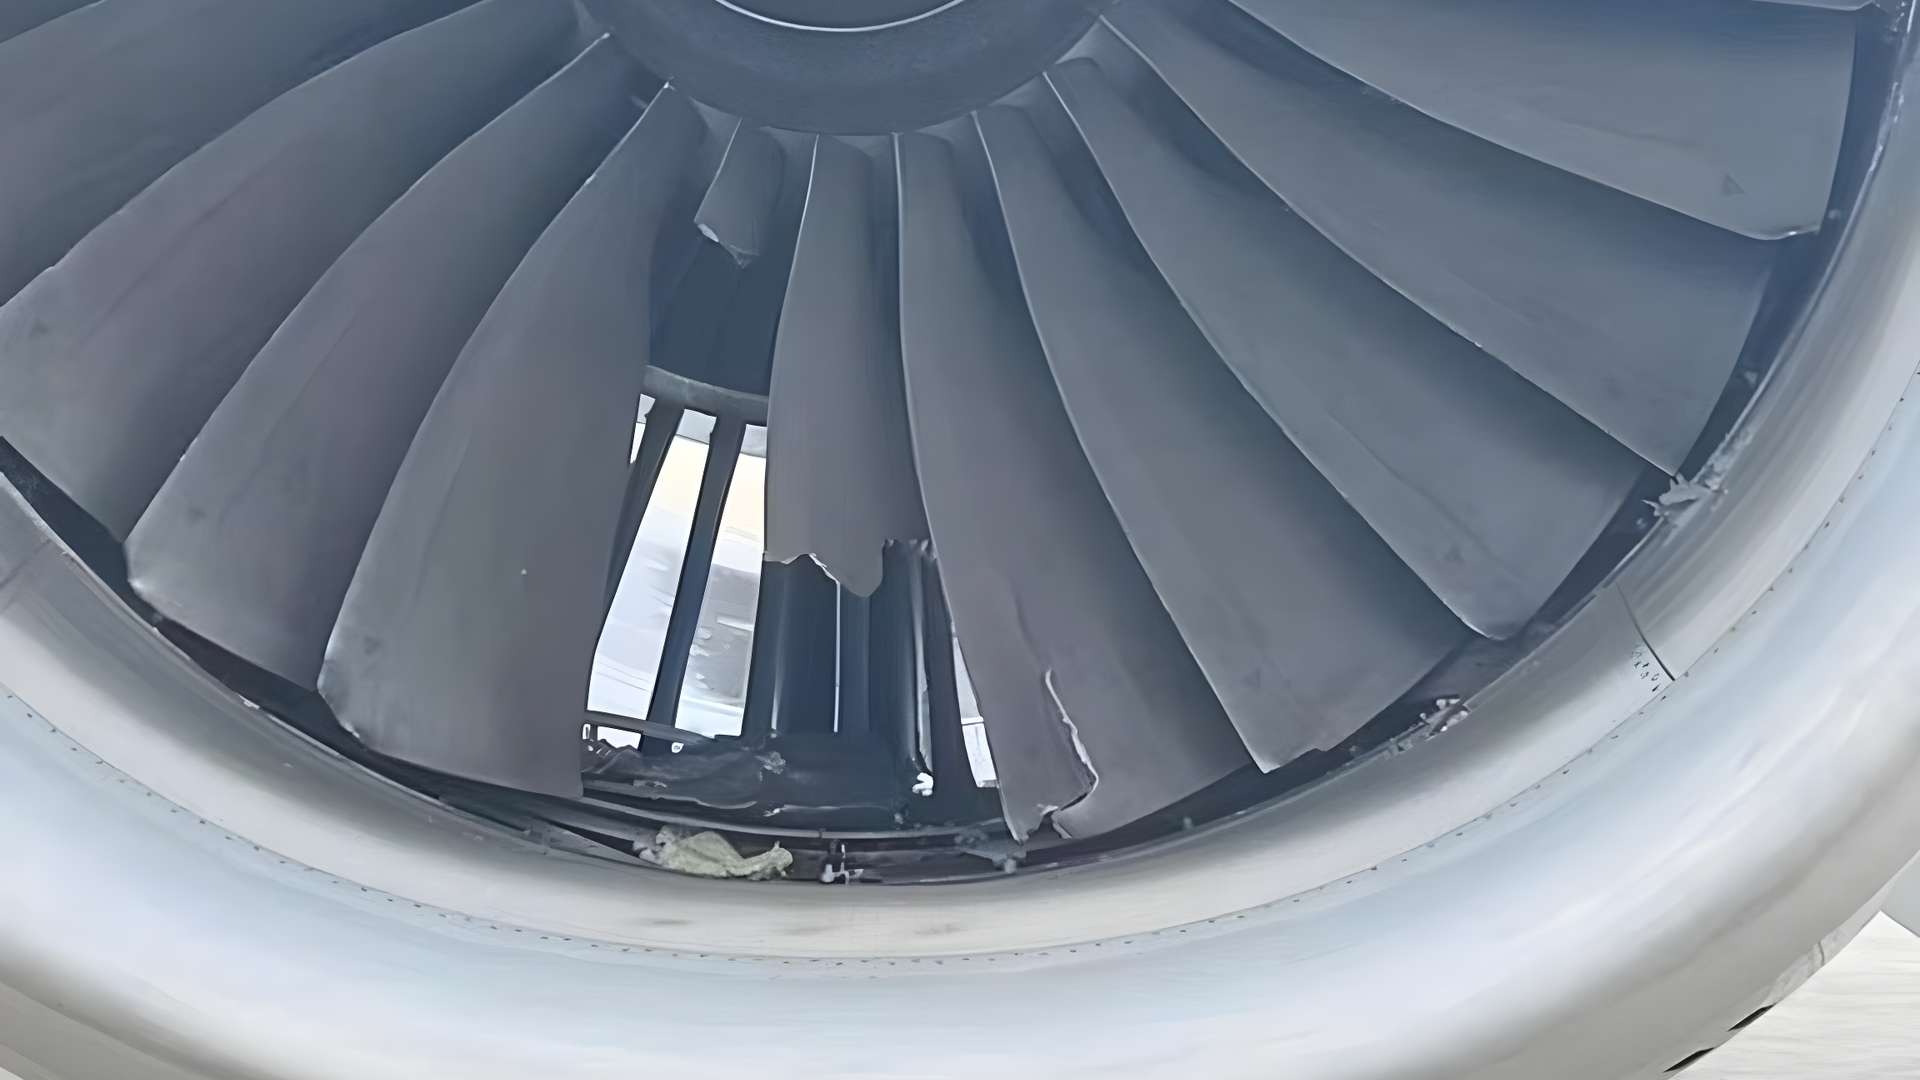 INCIDENT: A330 Engine Fan Blade Fracture, Vibrations In Flight